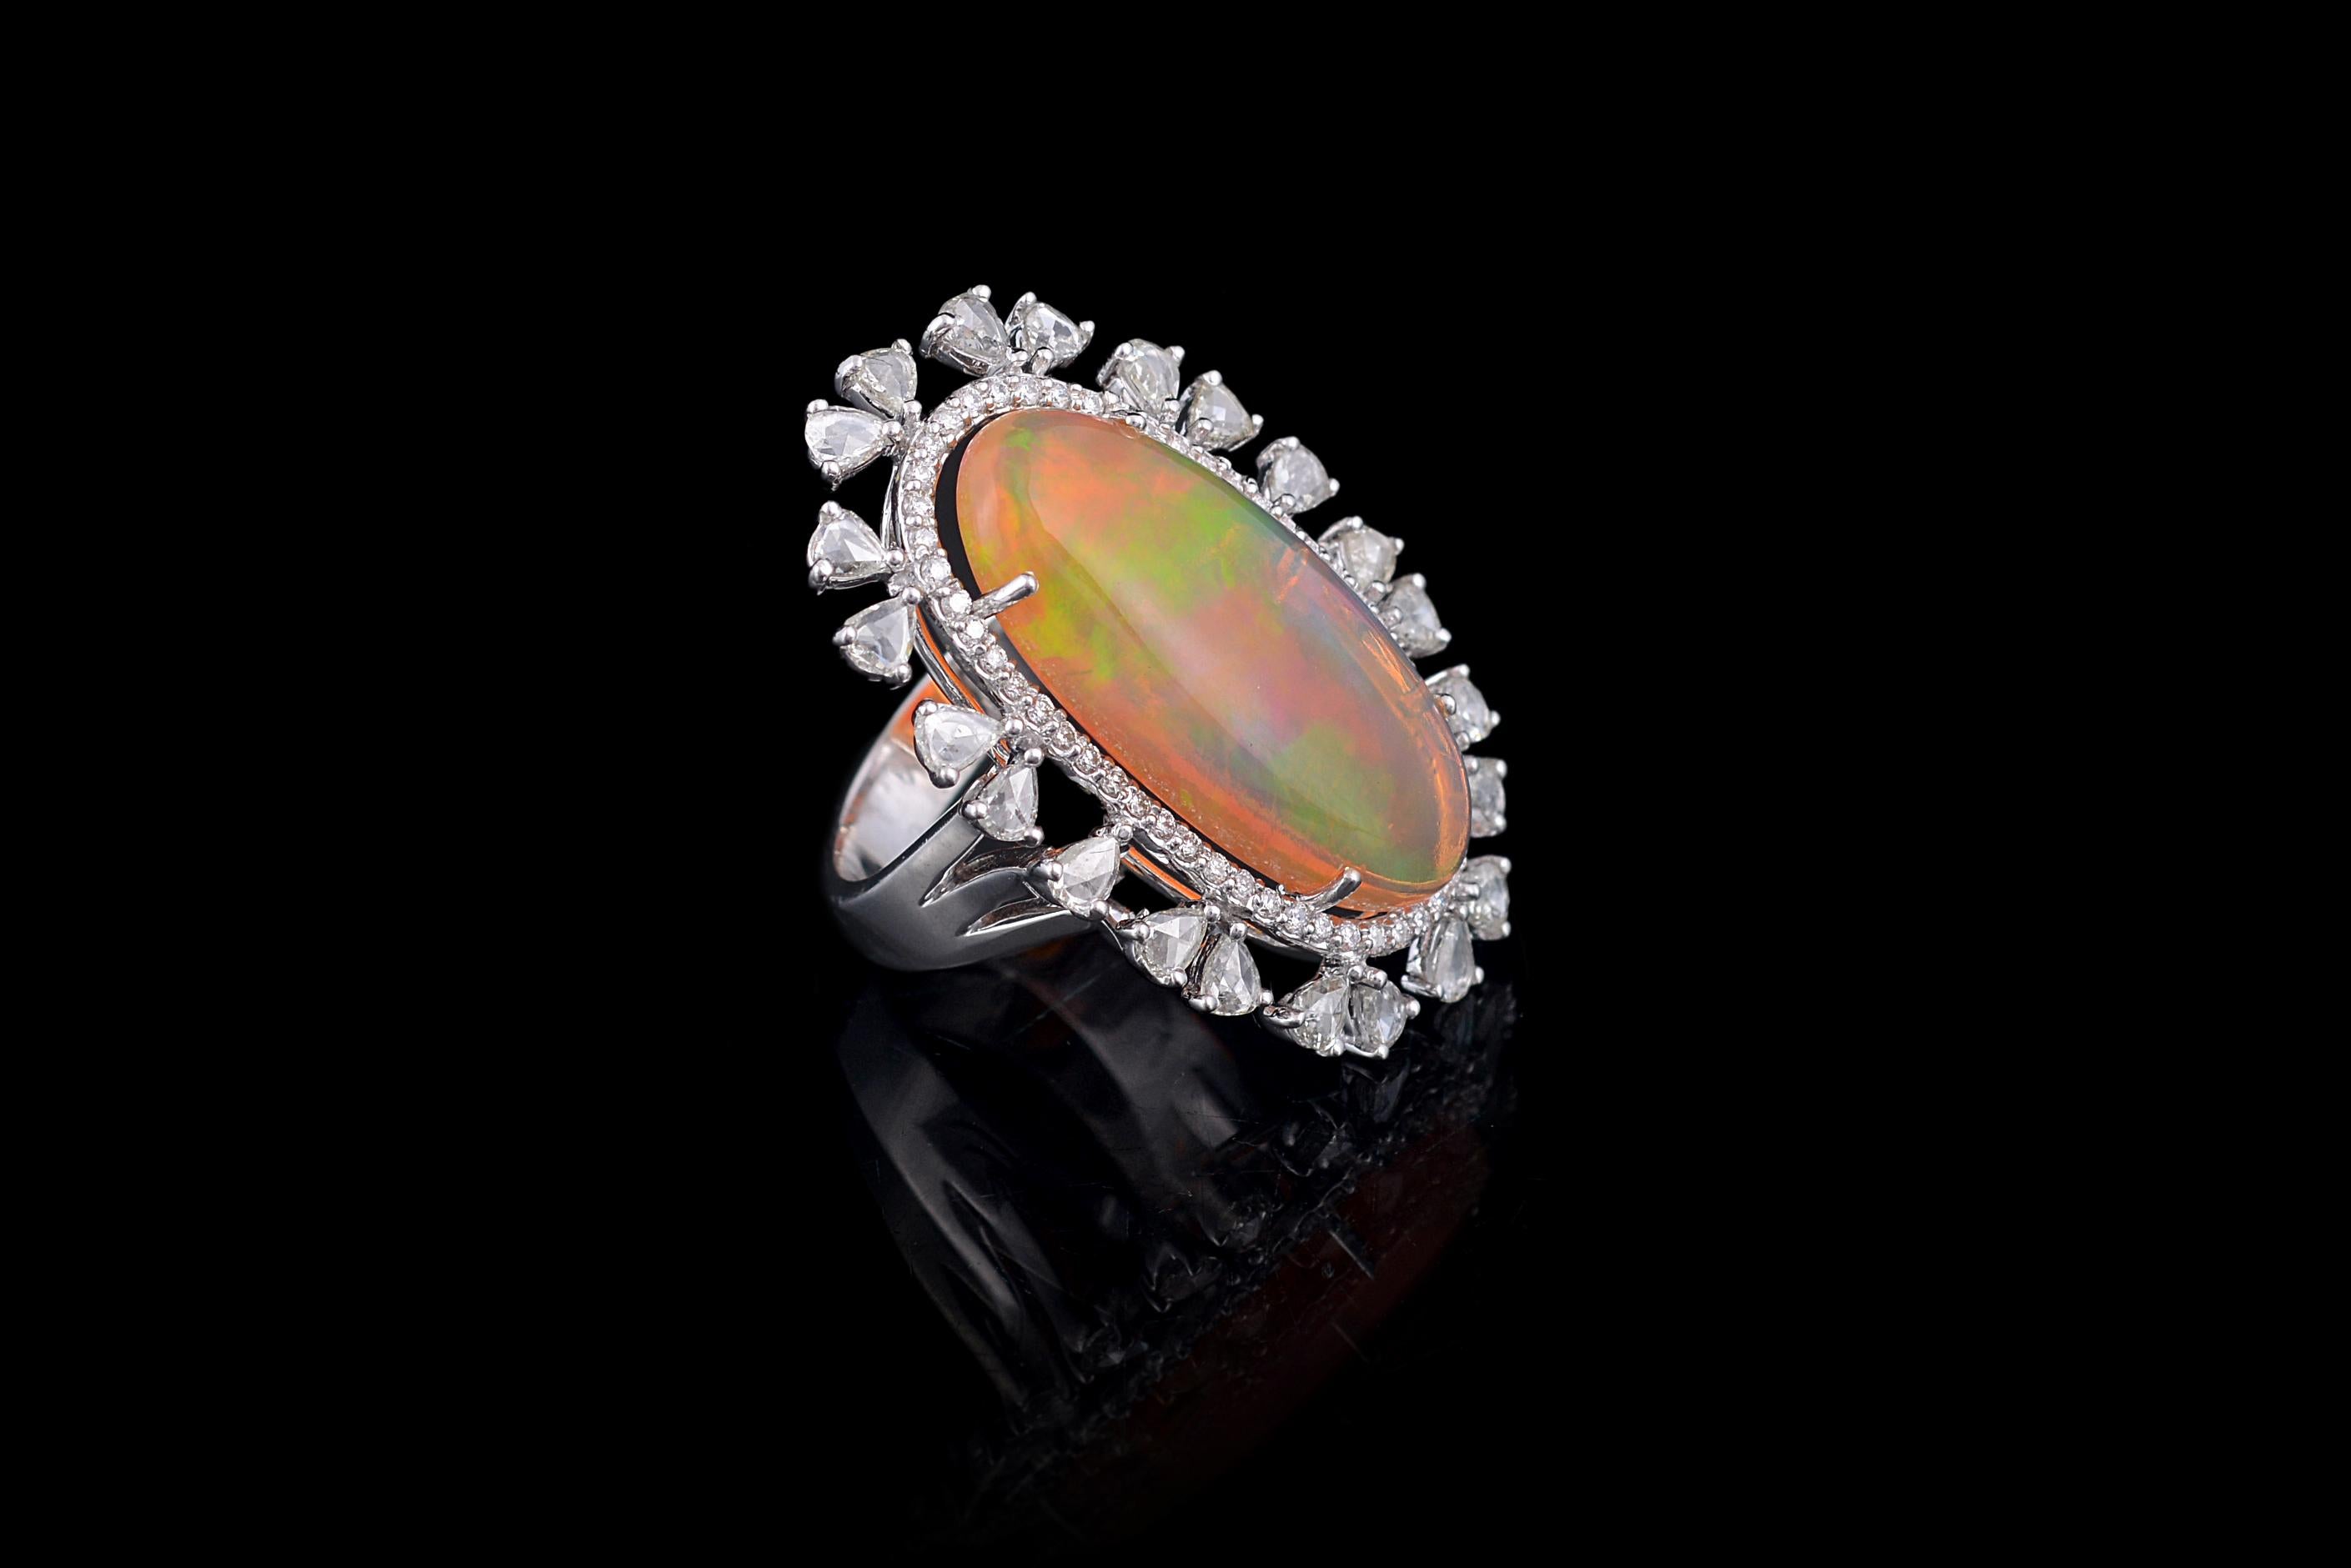 A gorgeous Opal and Rose cut Diamond cocktail ring set in 18K white gold. The opal, of Ethiopian origin, has a transparent water opal like colour and displays a orange - green play of colour. The weight of the opal is 8.28 carats. The weight of the